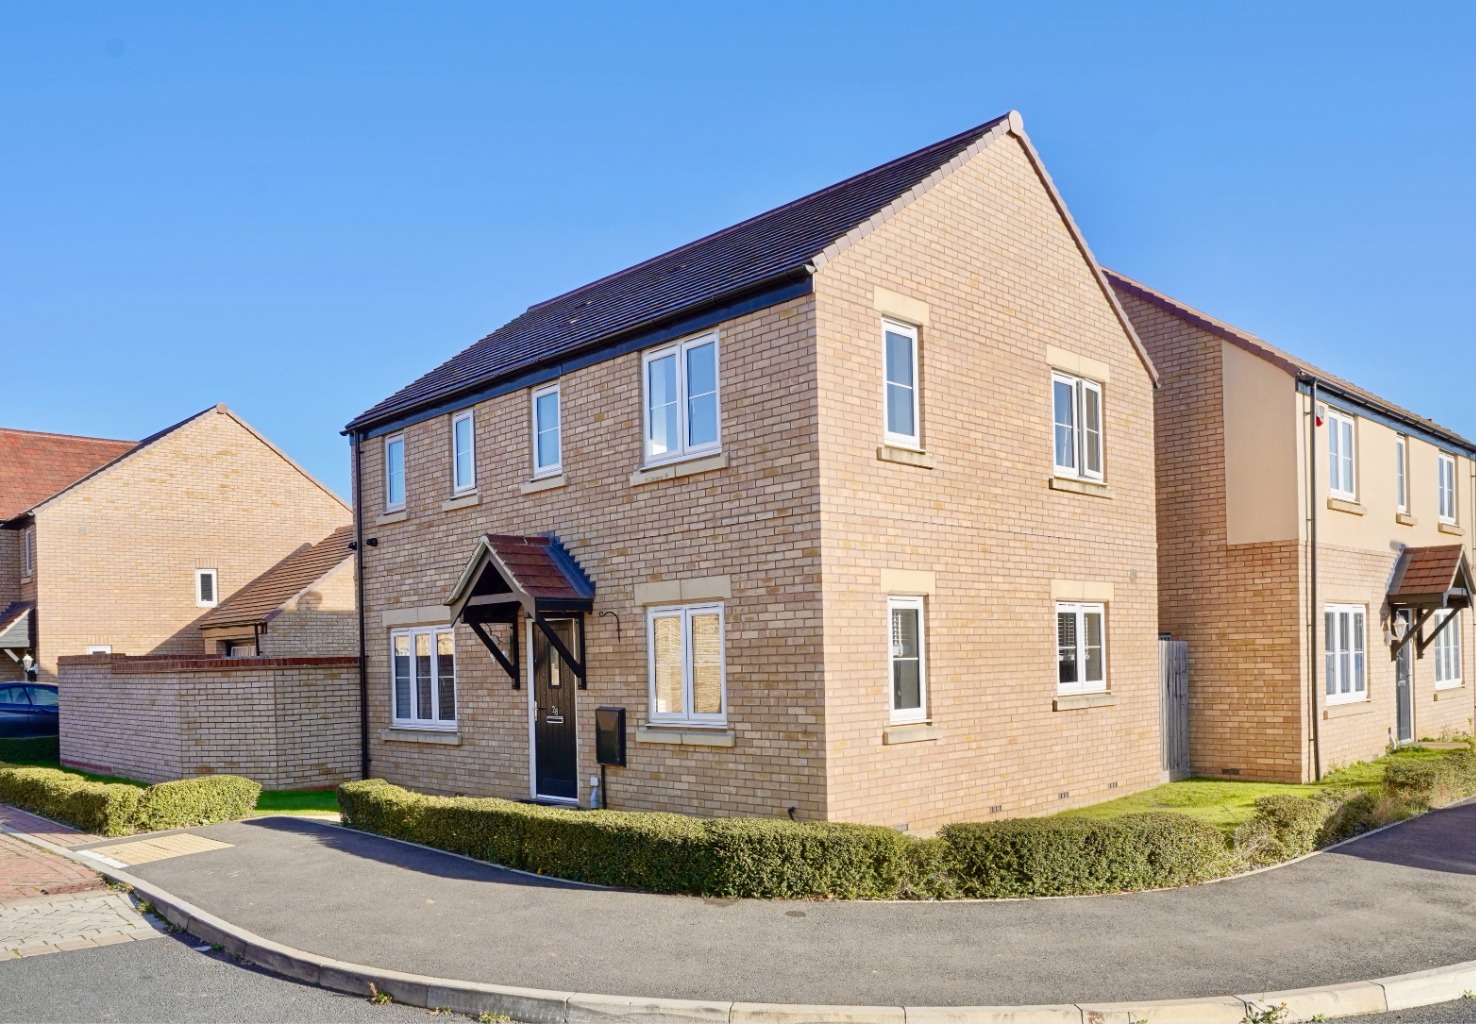 3 bed detached house for sale in 26 Apple Tree Close, Huntingdon - Property Image 1